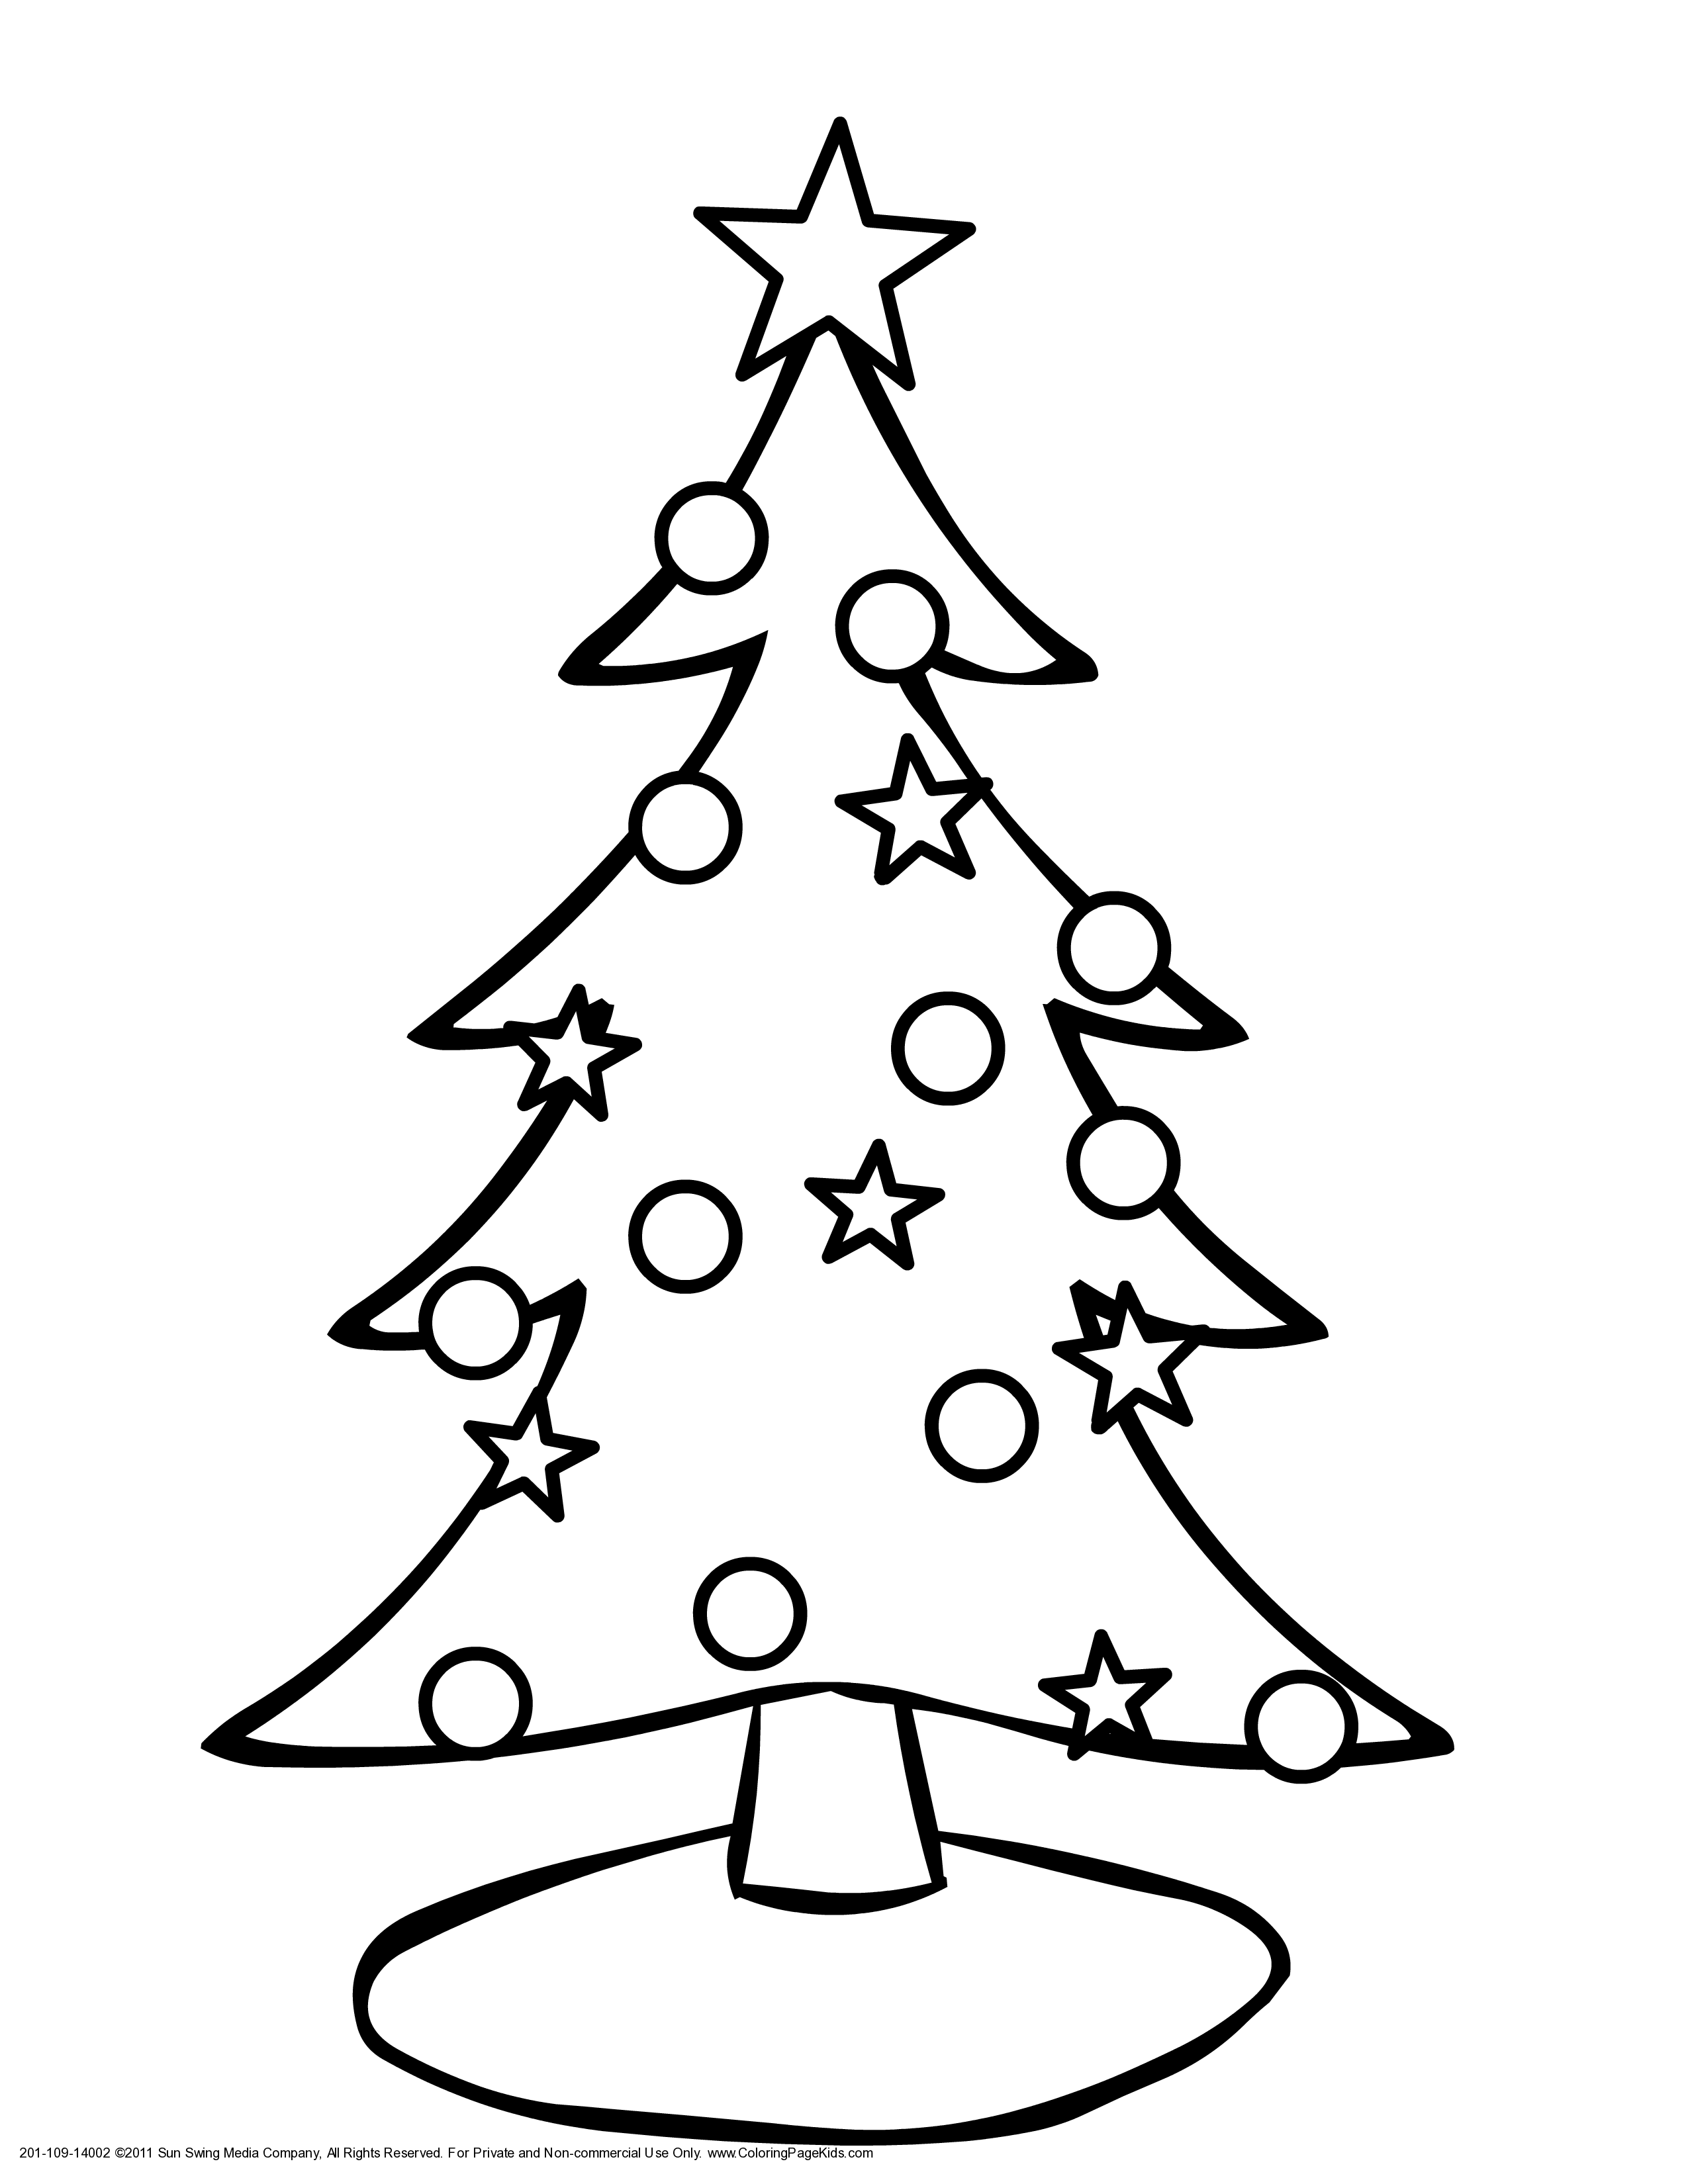  Christmas tree coloring pages – coloring book – #7